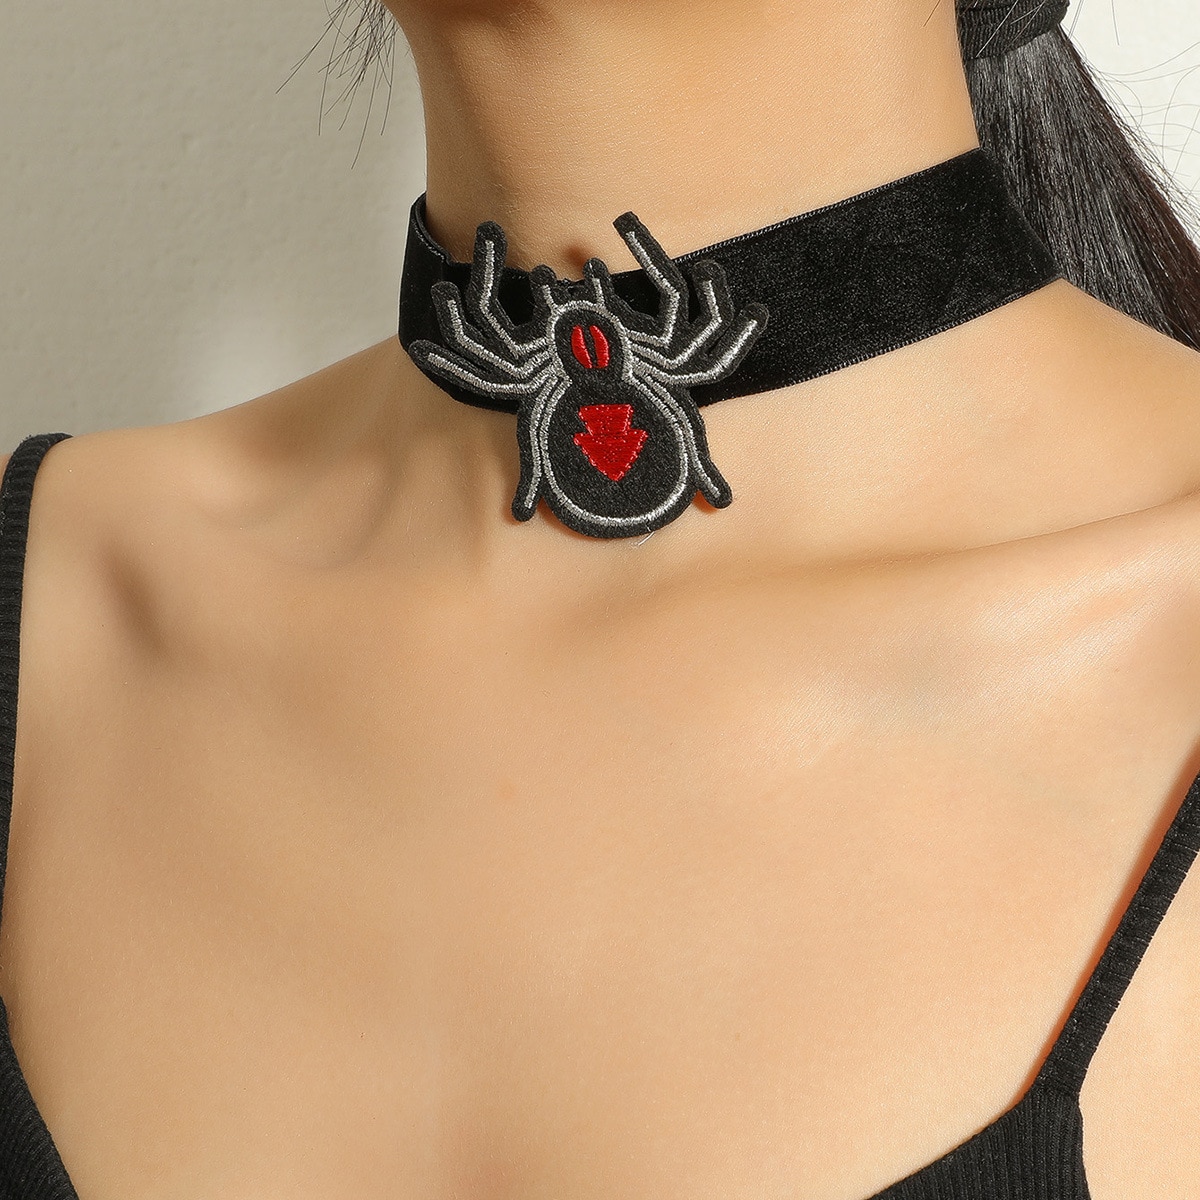 Vintage-Fashion-Black-Velvet-Spider-Necklace-for-Women-Gothic-Collar-Necklaces-Jewelry-Gift-Punk-Gir-1005004887276588-3